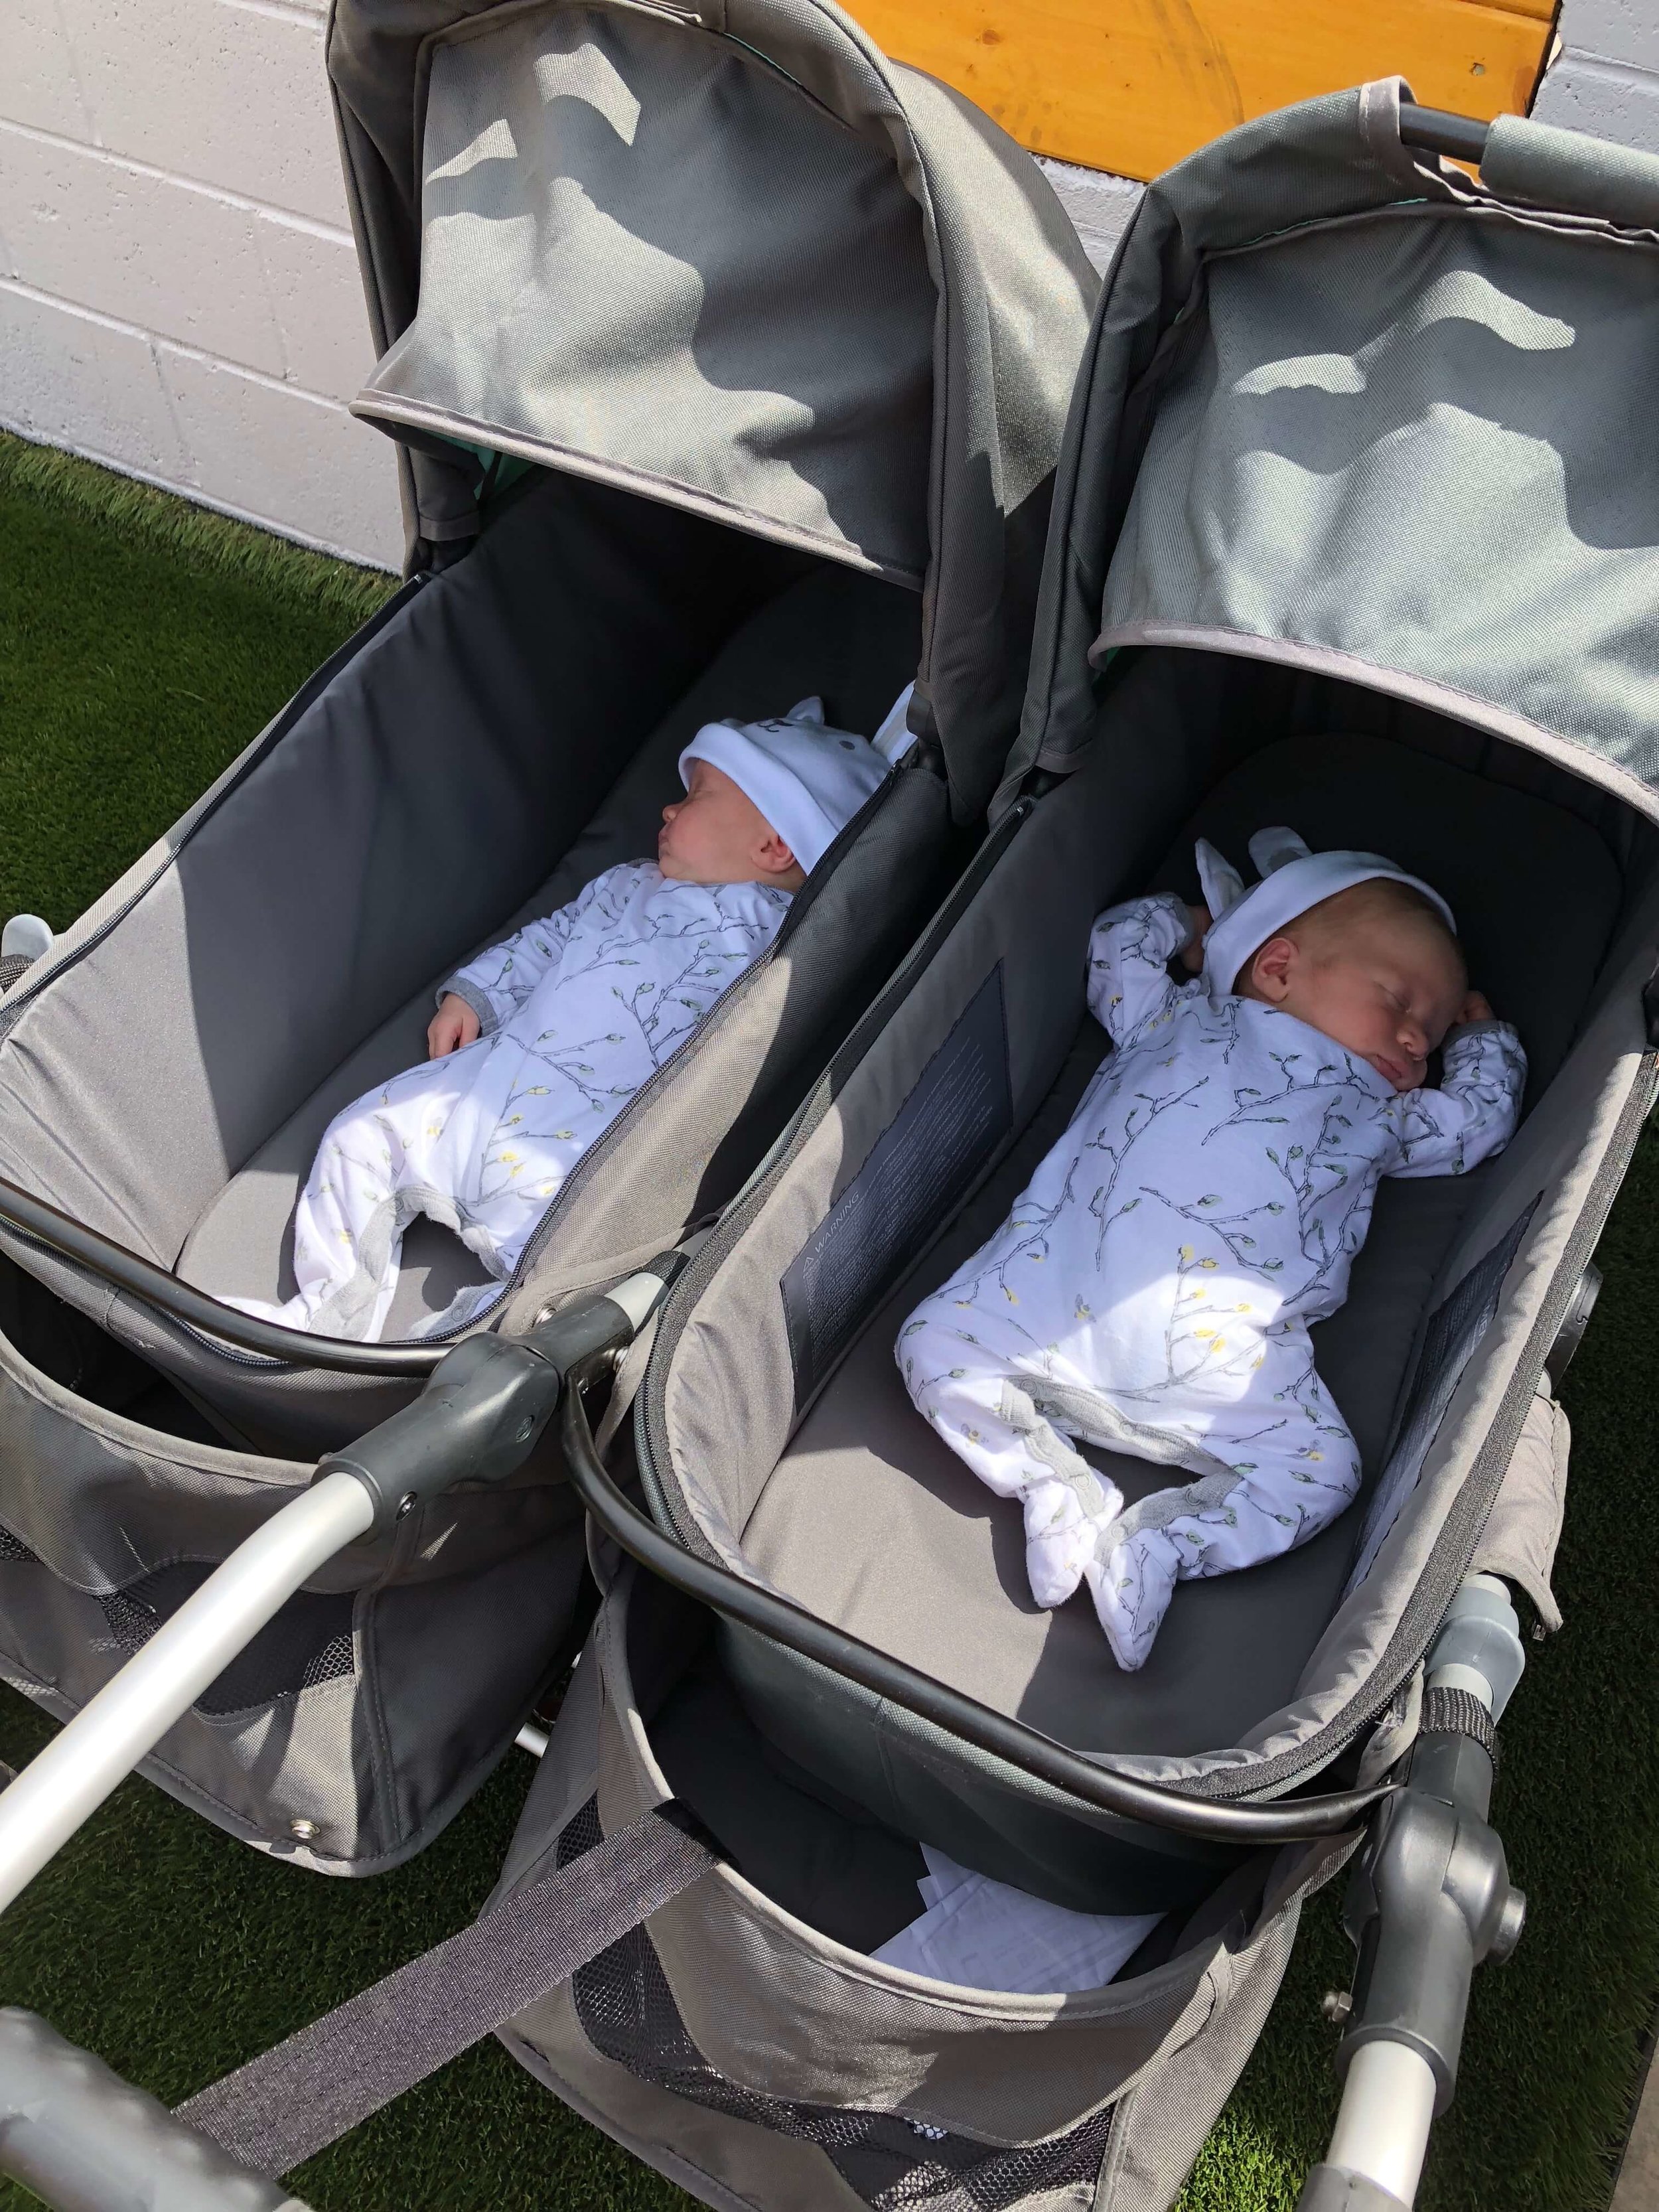 twin baby bouncer